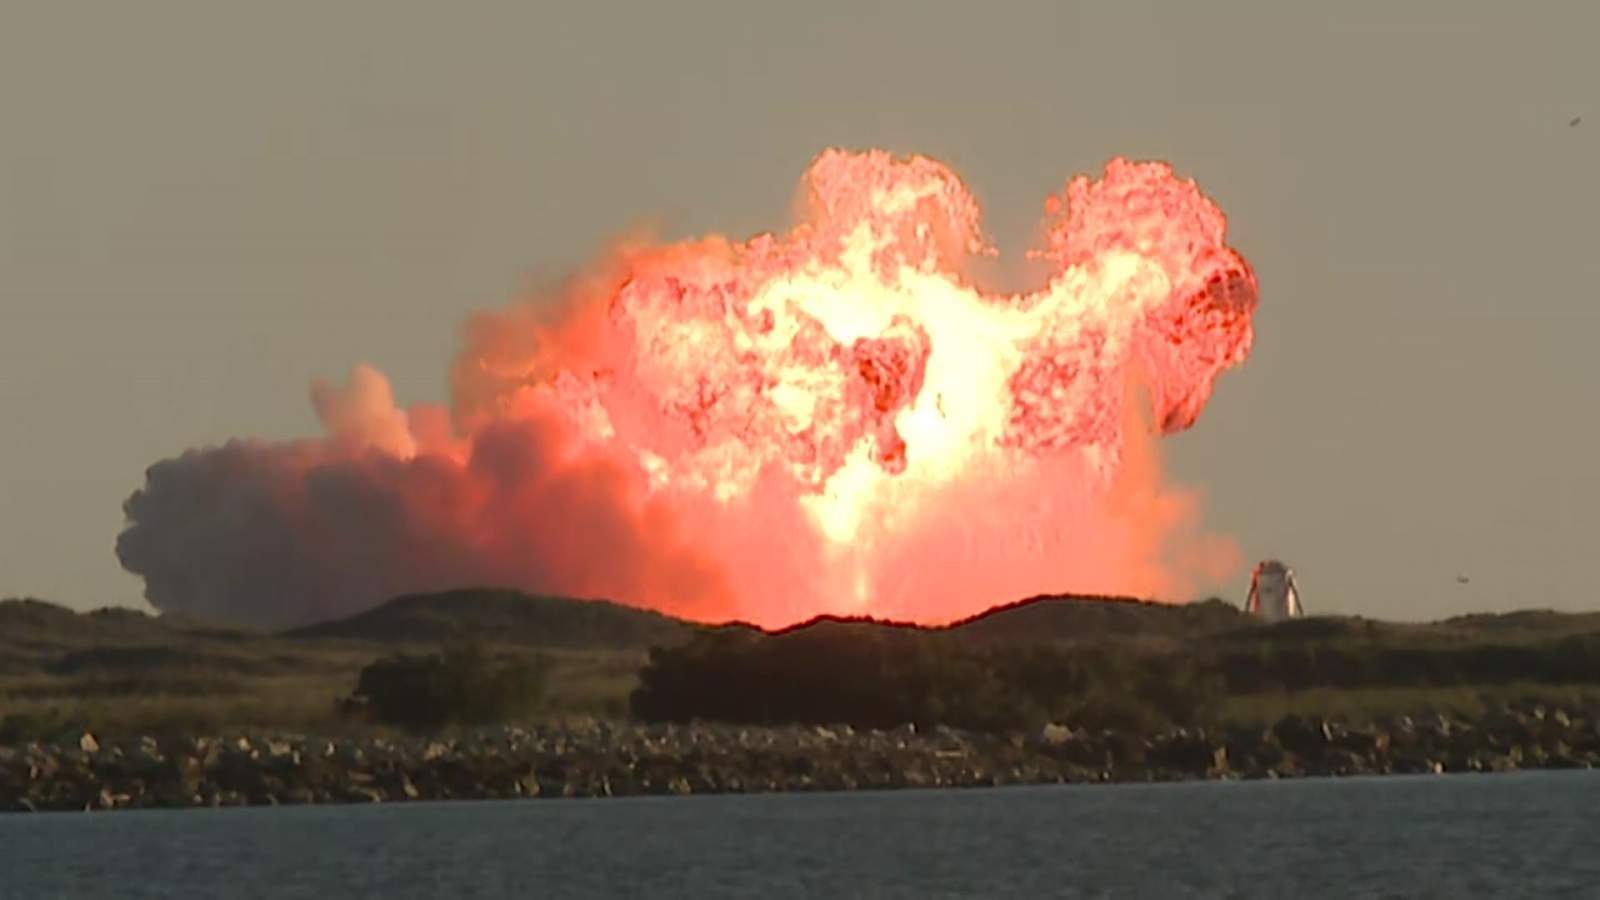 SpaceX’s Starship SN8 blows up during landing phase of high-altitude test flight